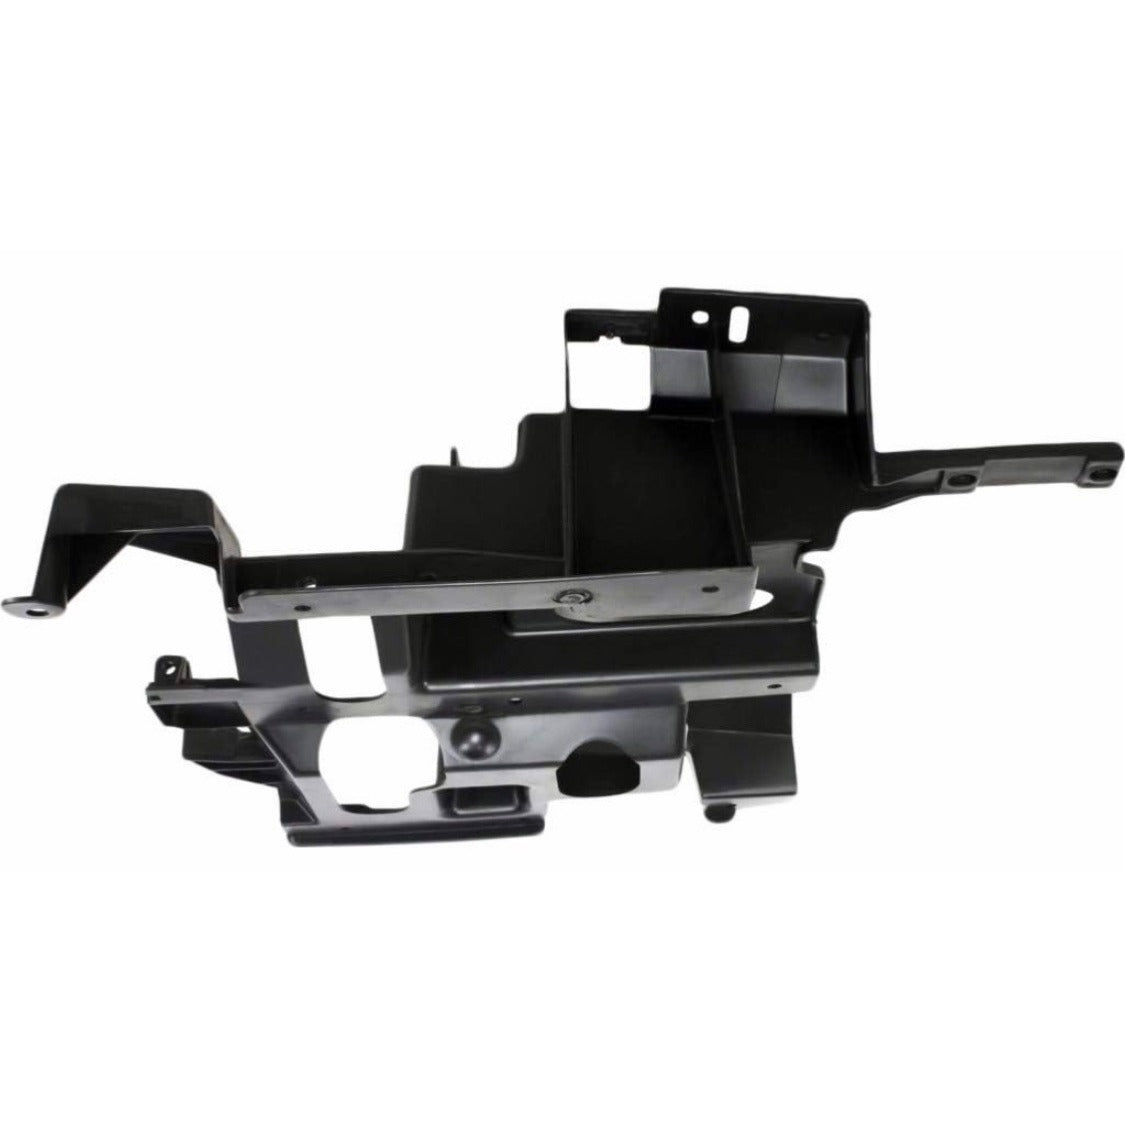 for Chevy Silverado 1500 / 2500 / 3500 Headlight Bracket 2003 04 05 2006 Driver and Passenger Side Pair / Set | Support | Includes 2007 Clas